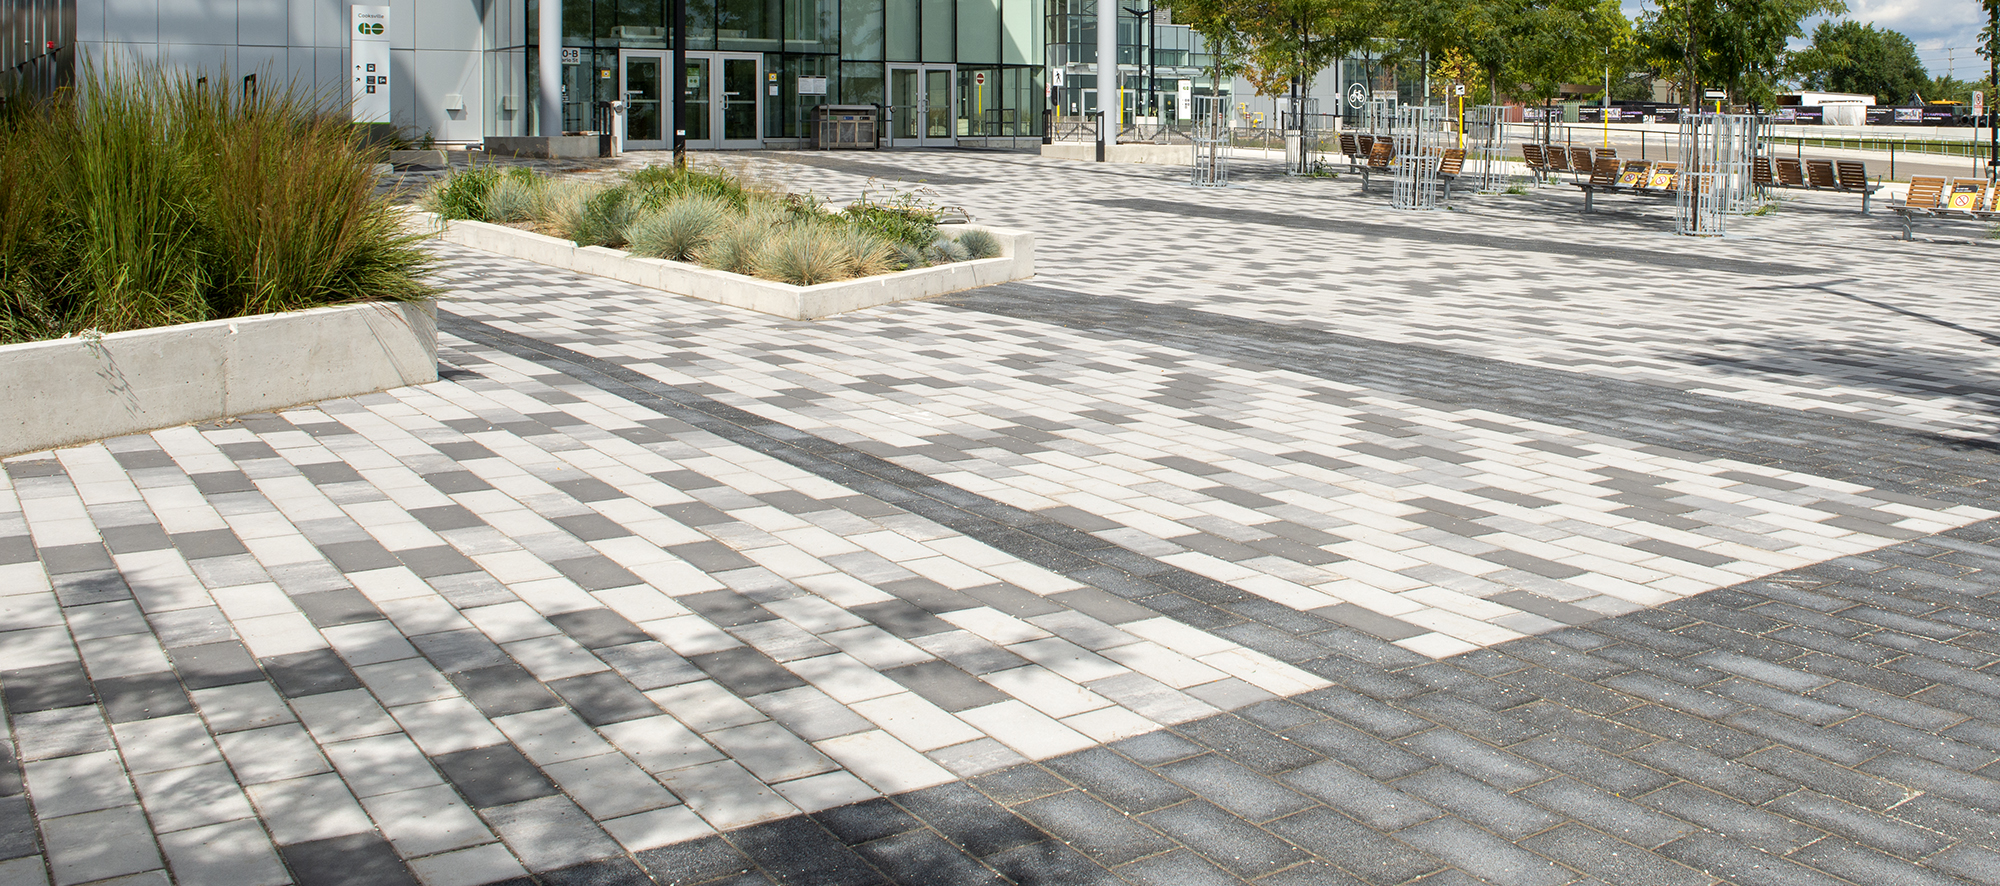 This expansive plaza features multiple park benches and natural greenery, combined with a paver bed of tri-colored Promenade Plank pavers.